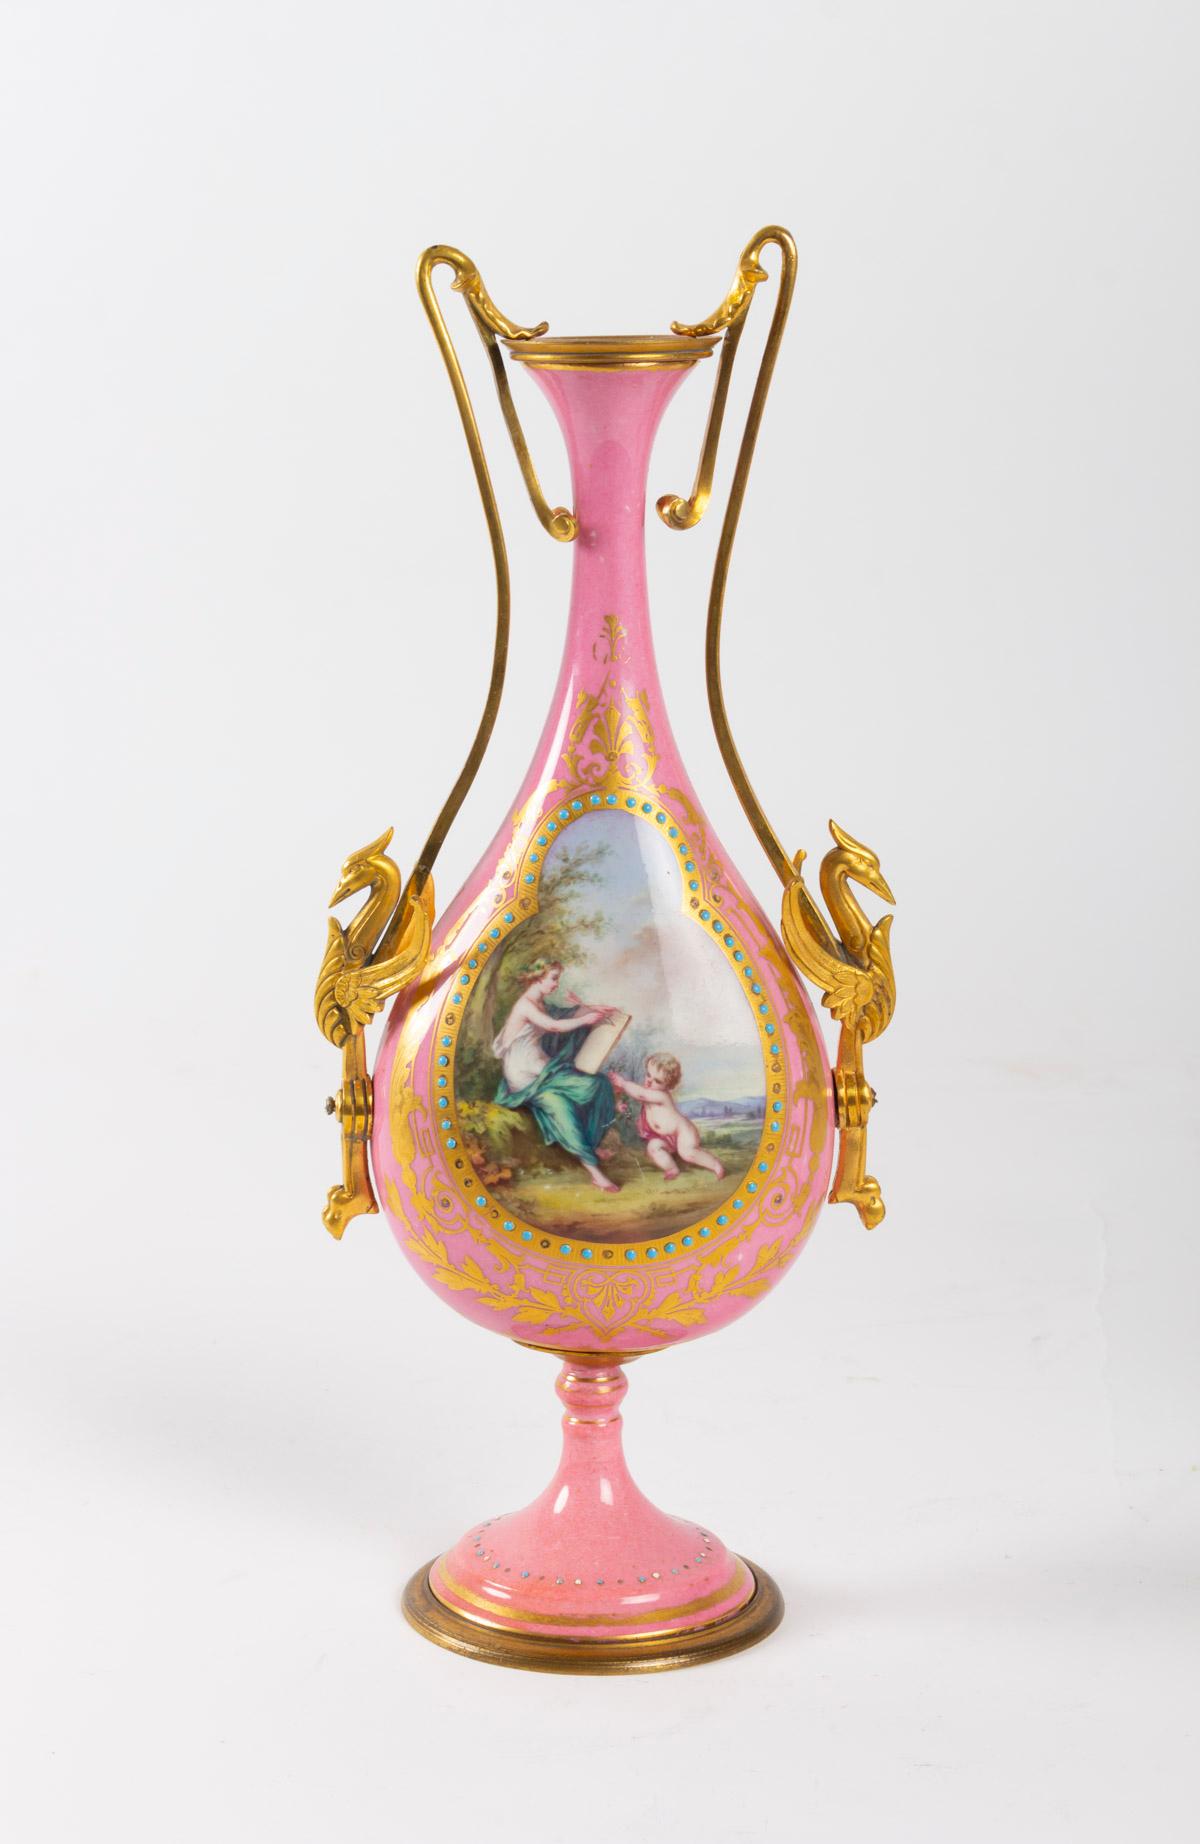 French Pair of Enameled Porcelain and Gilded Bronze Vases, Napoleon III Period